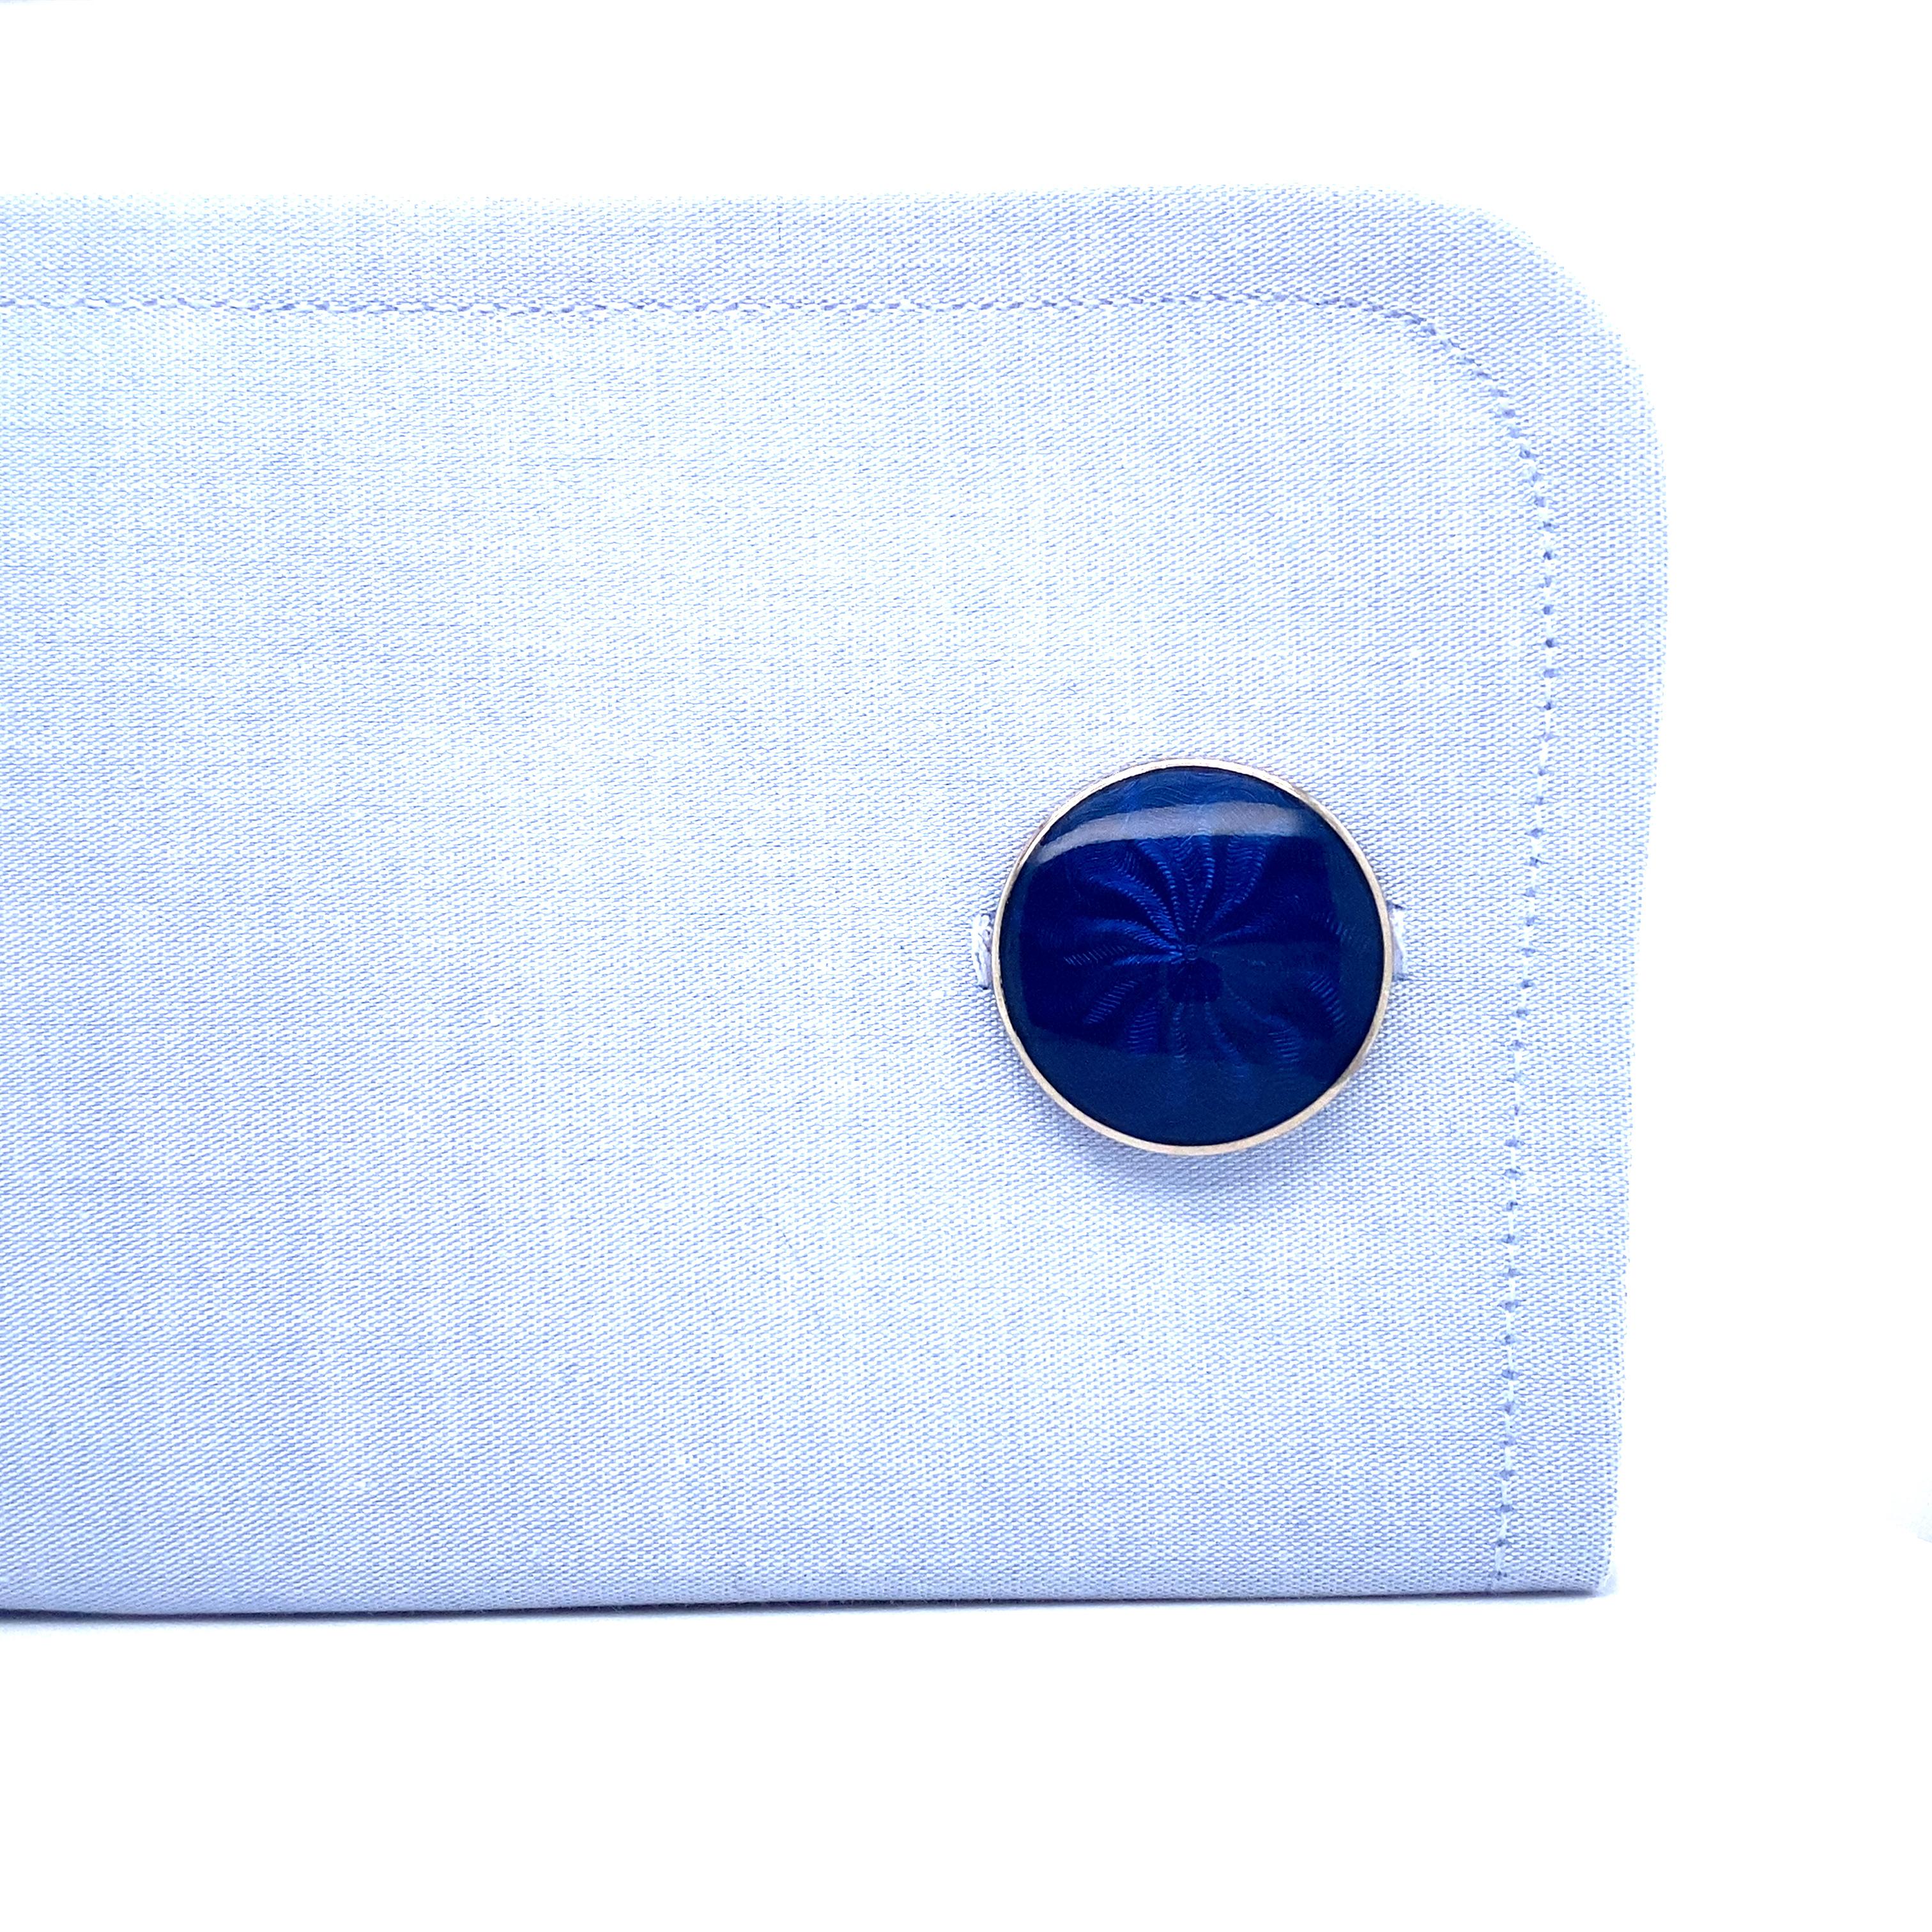 Round Cufflinks, 18k White Gold, with Blue Guilloche Enamel For Sale 3